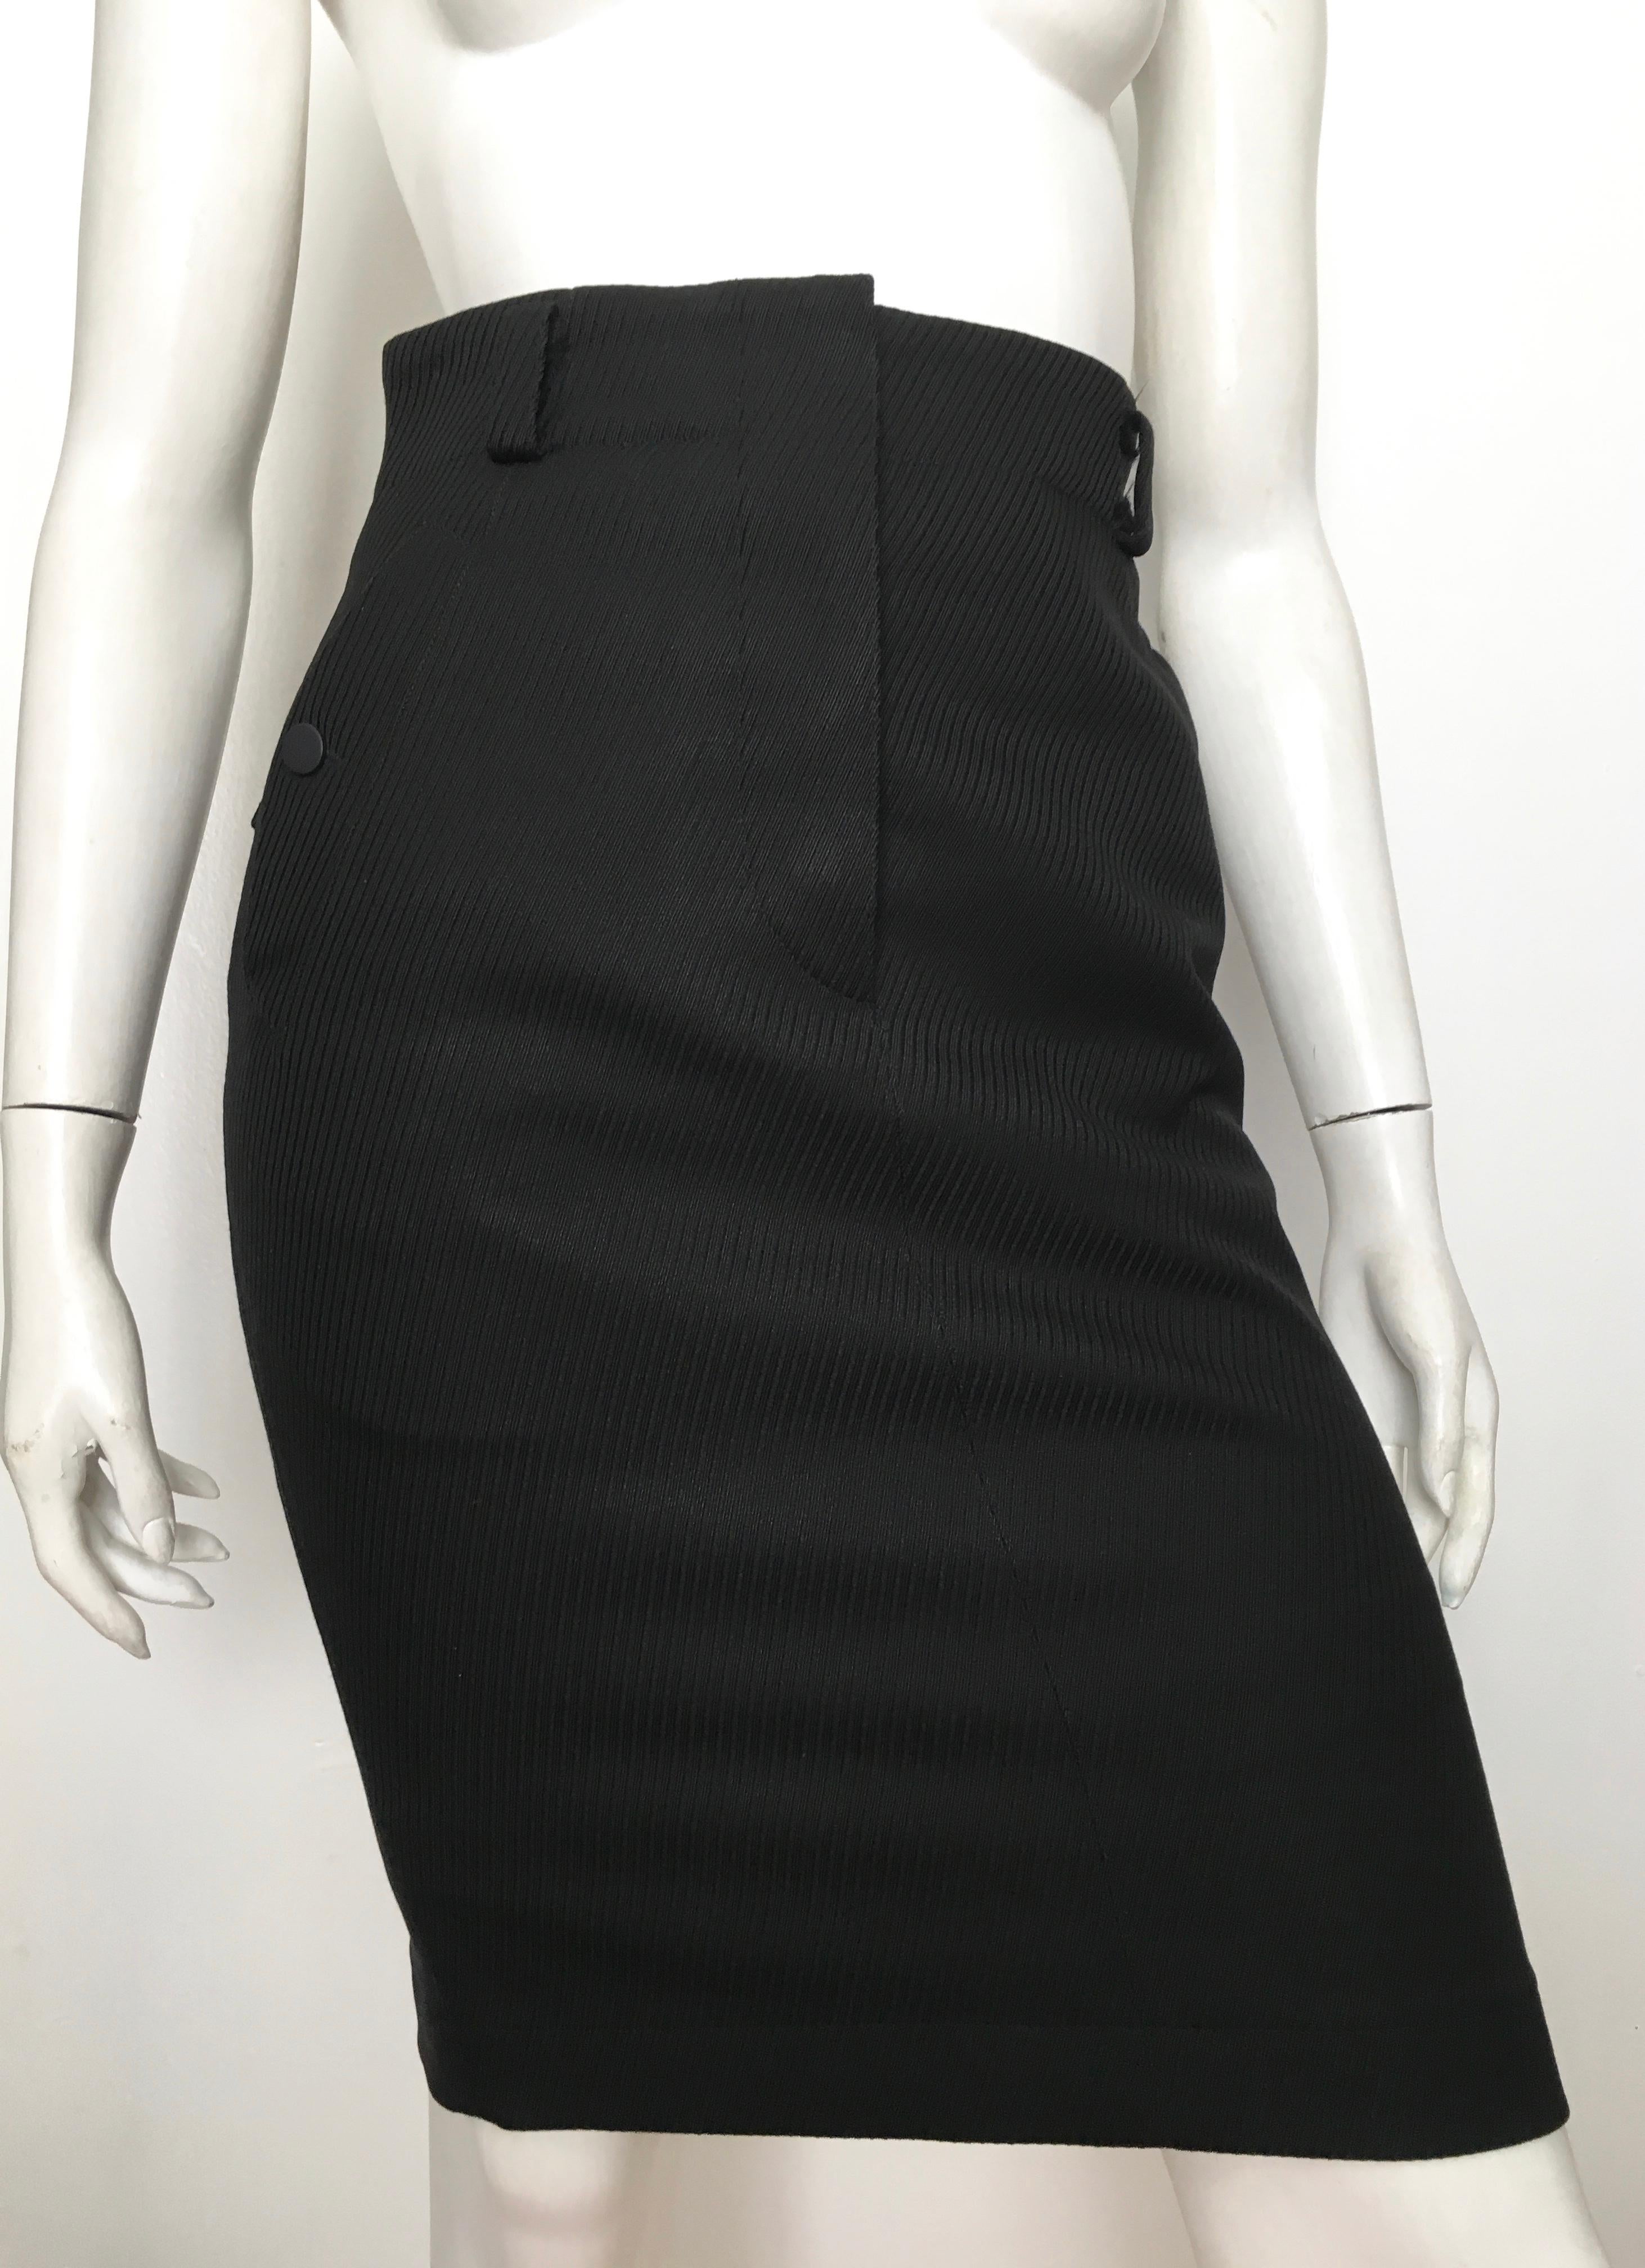 Azzedine Alaia 1980s black pencil skirt with pockets is labeled a size 6 but fits more like an US size 4.  The waist on this skirt is 28